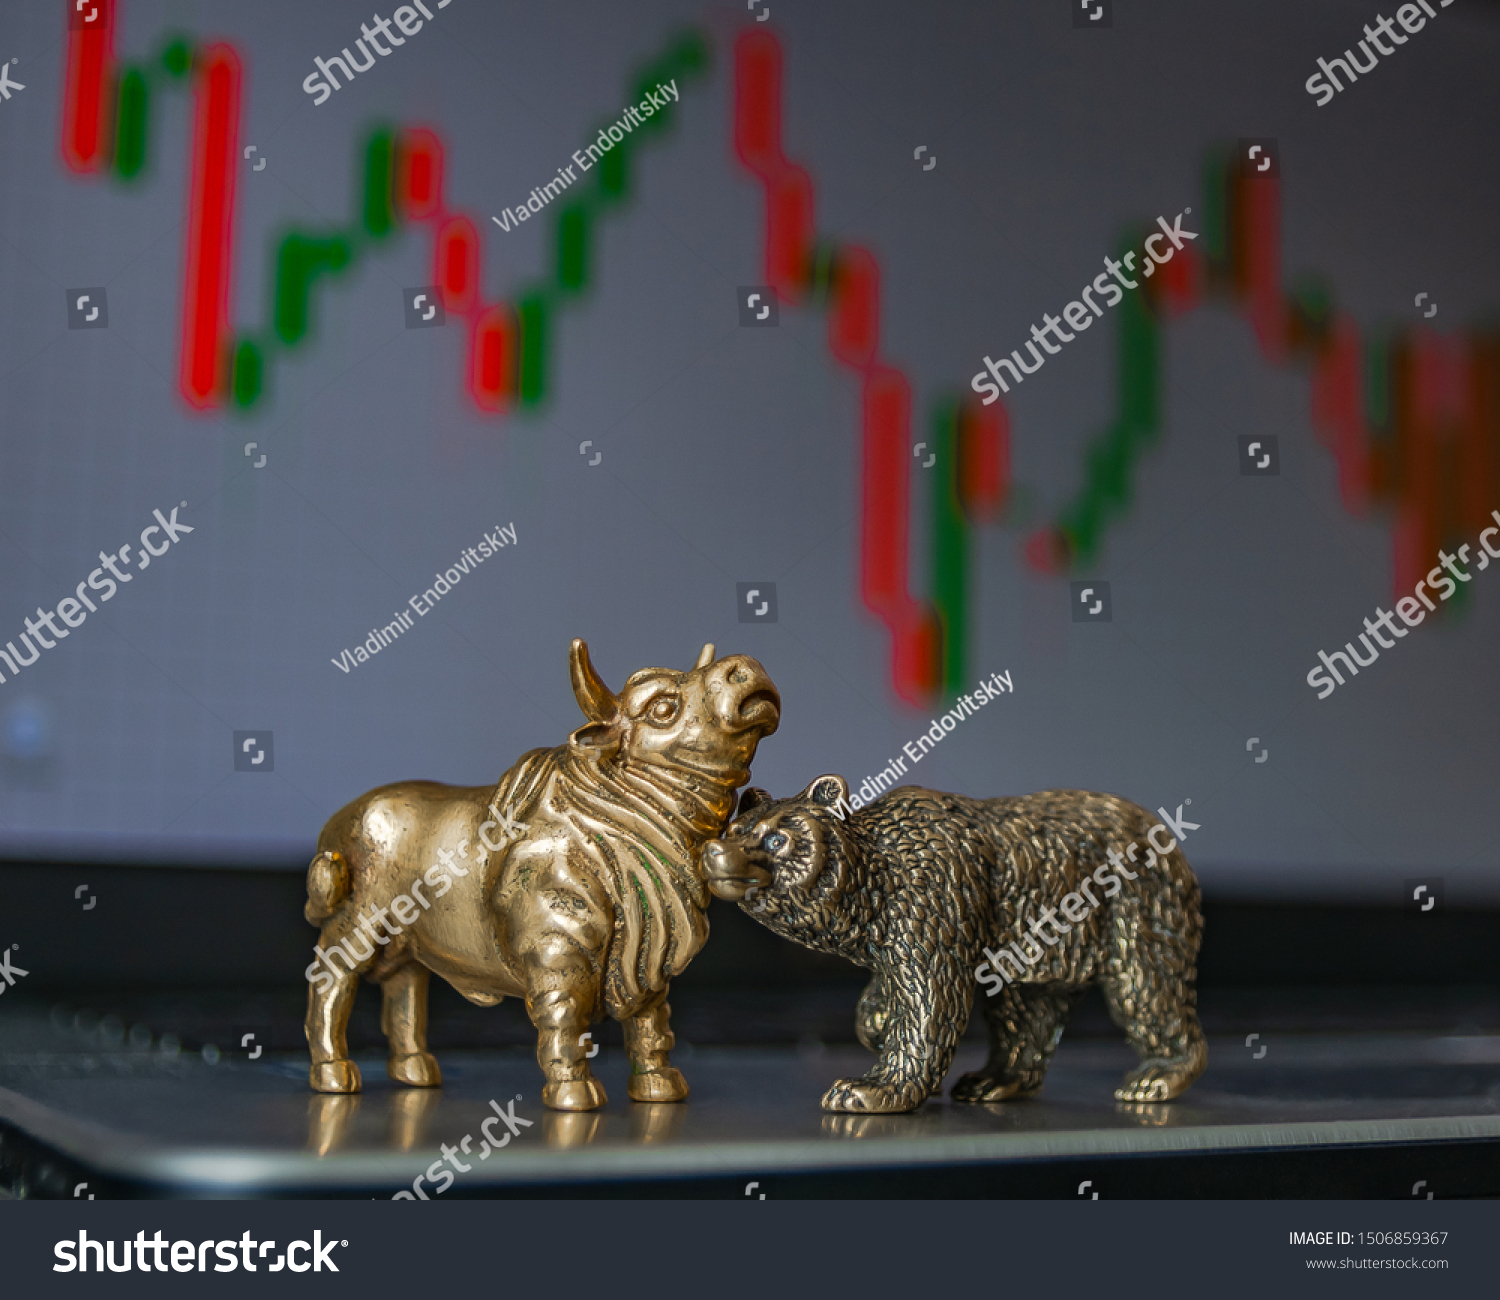 Bull and bear as symbols of stock trading on a blurred background of price graphics. The concept of symbolism of commodity and financial world markets. #1506859367